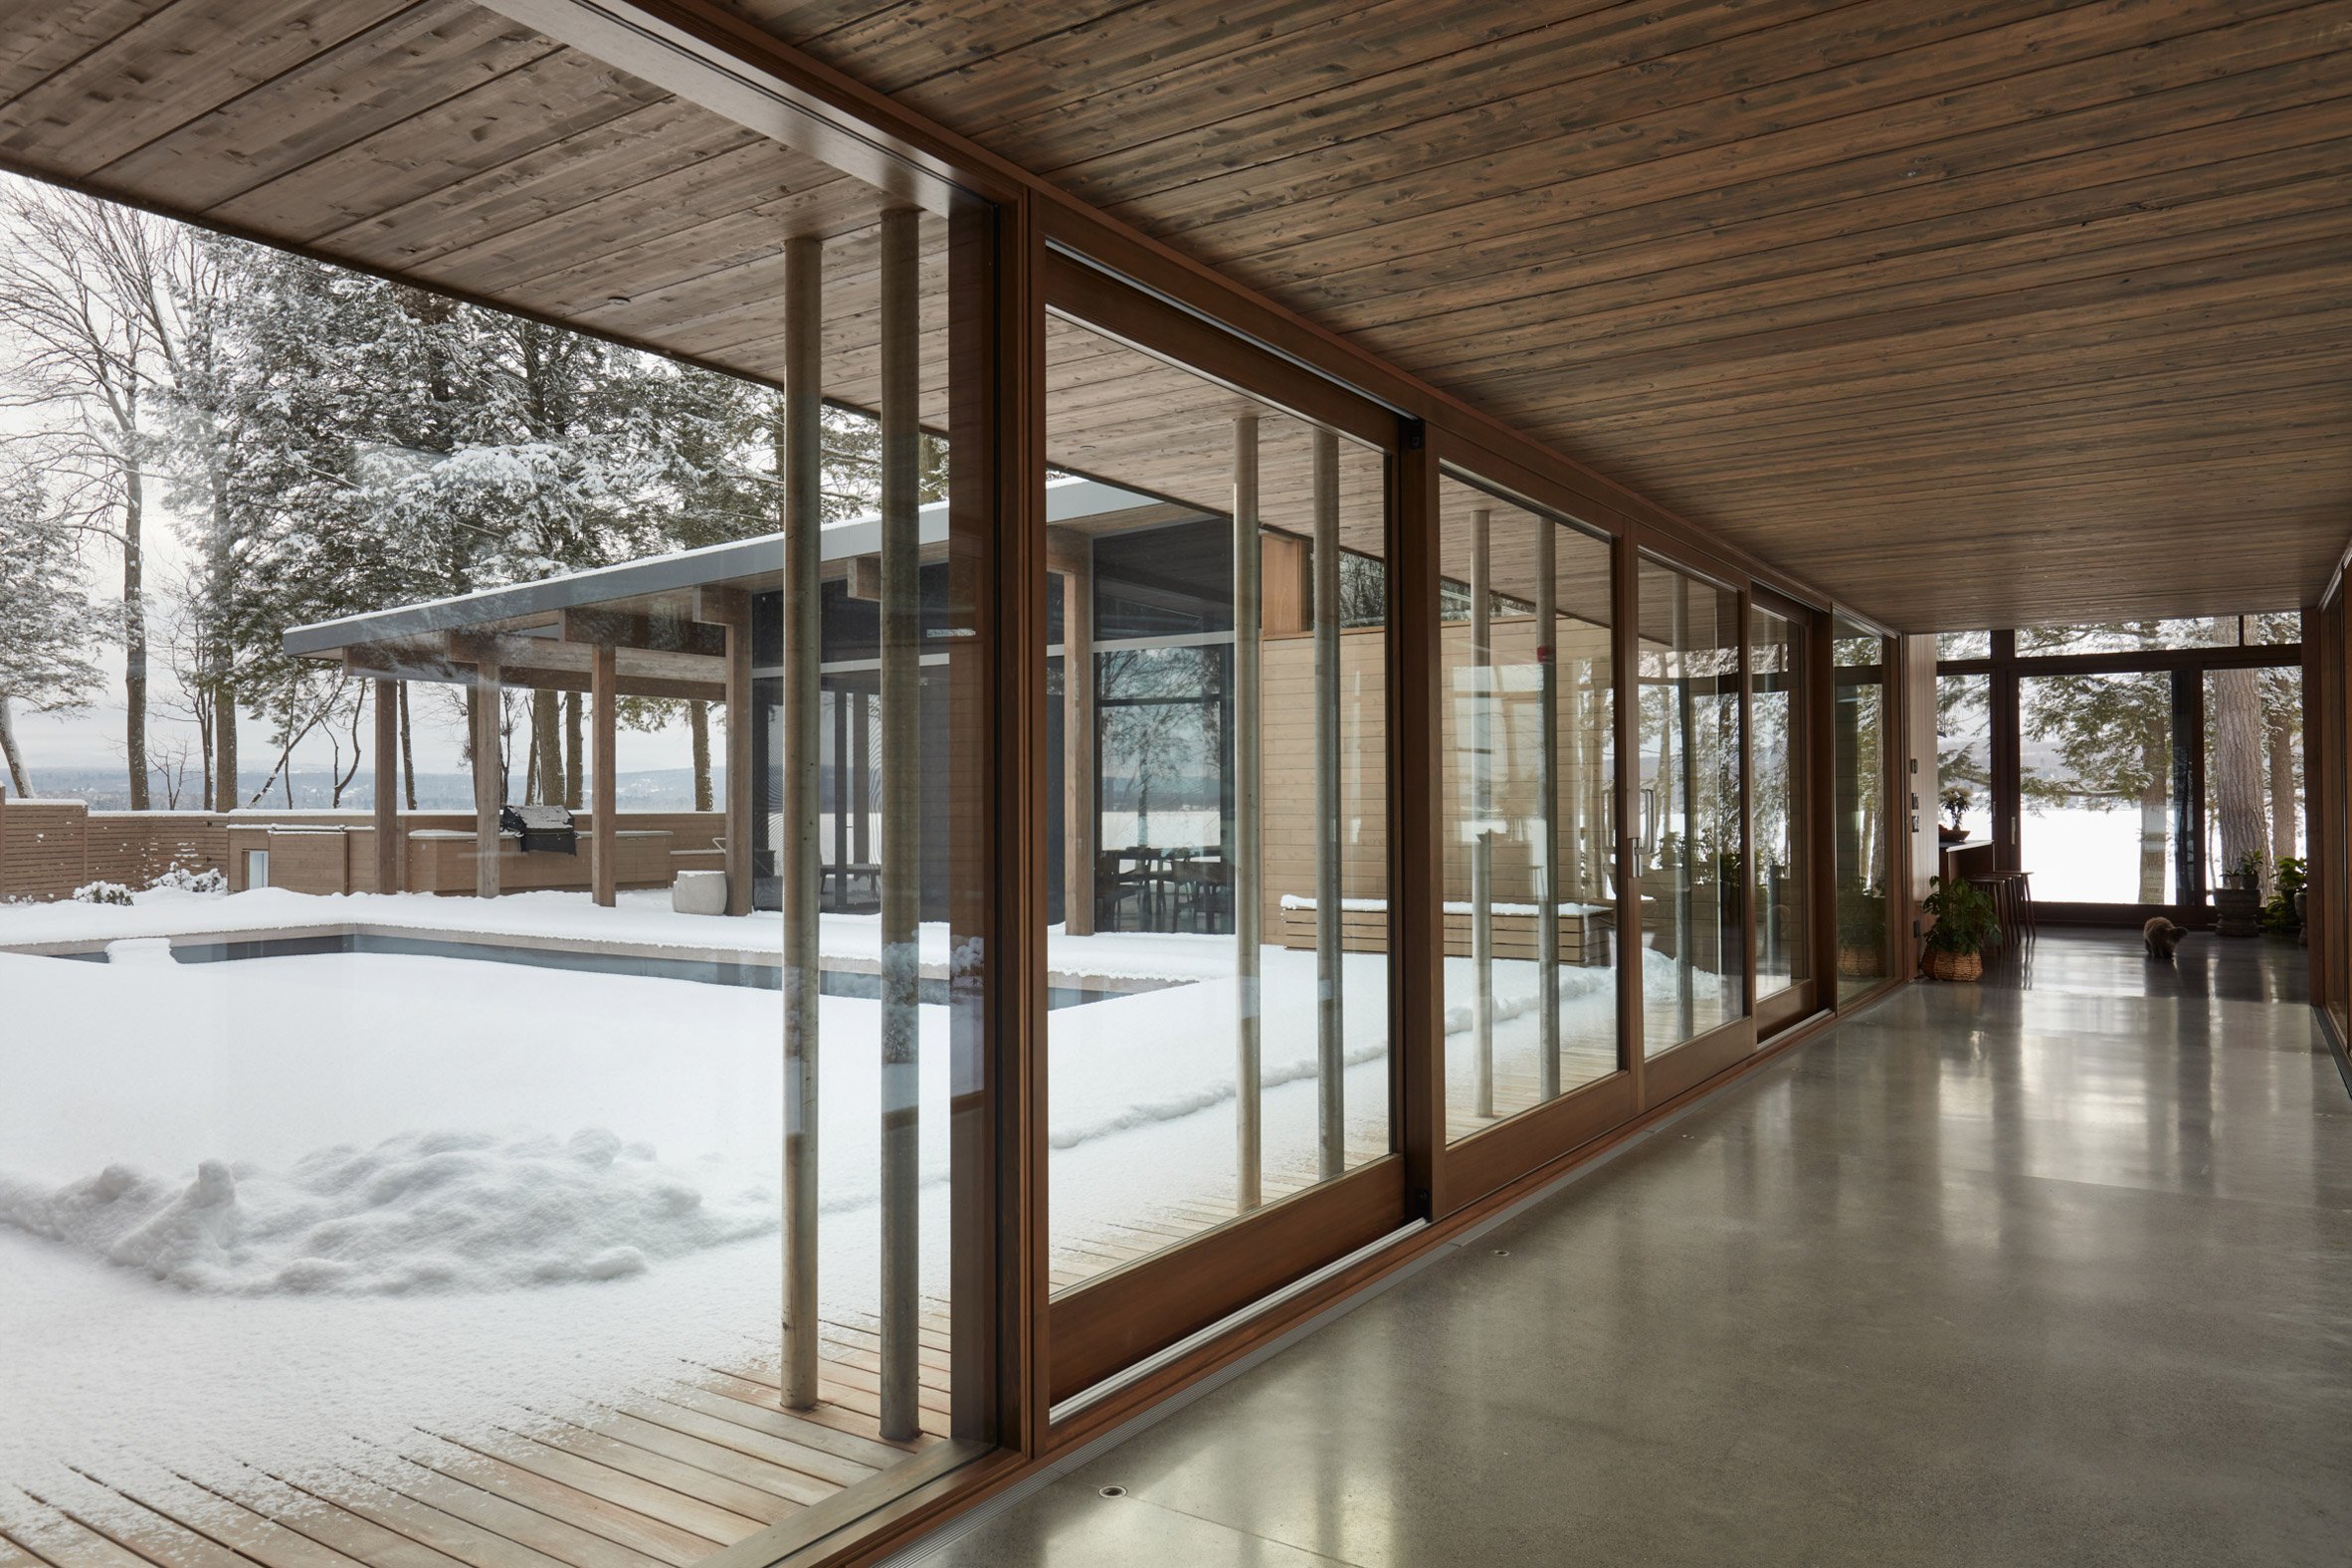 Central courtyard in the snow by Atelier Pierre Thibault